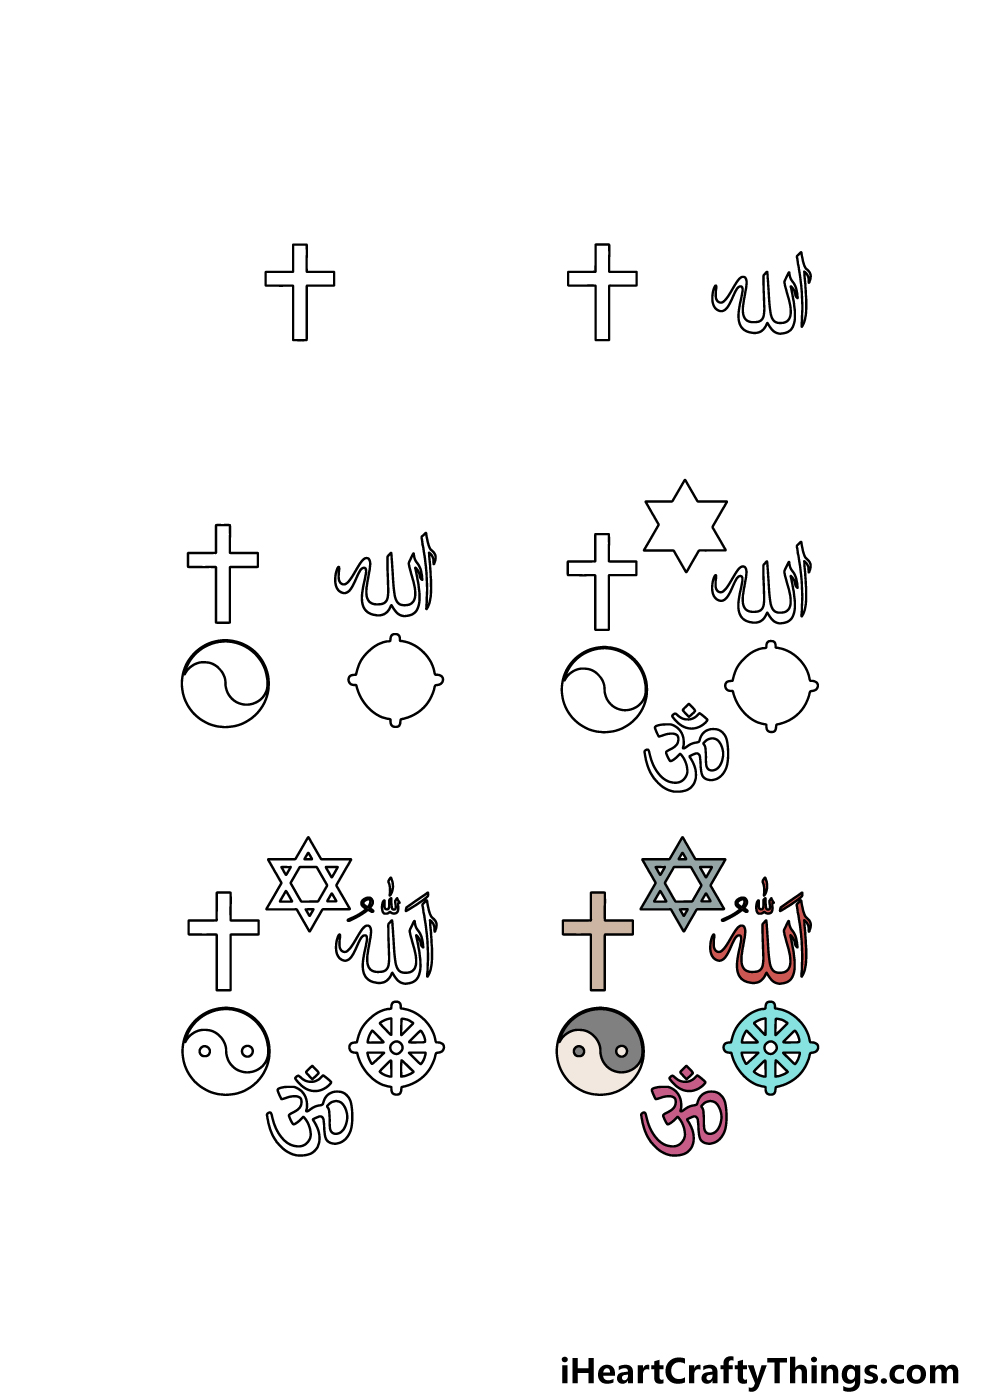 How to Draw Religious Symbols in 6 steps